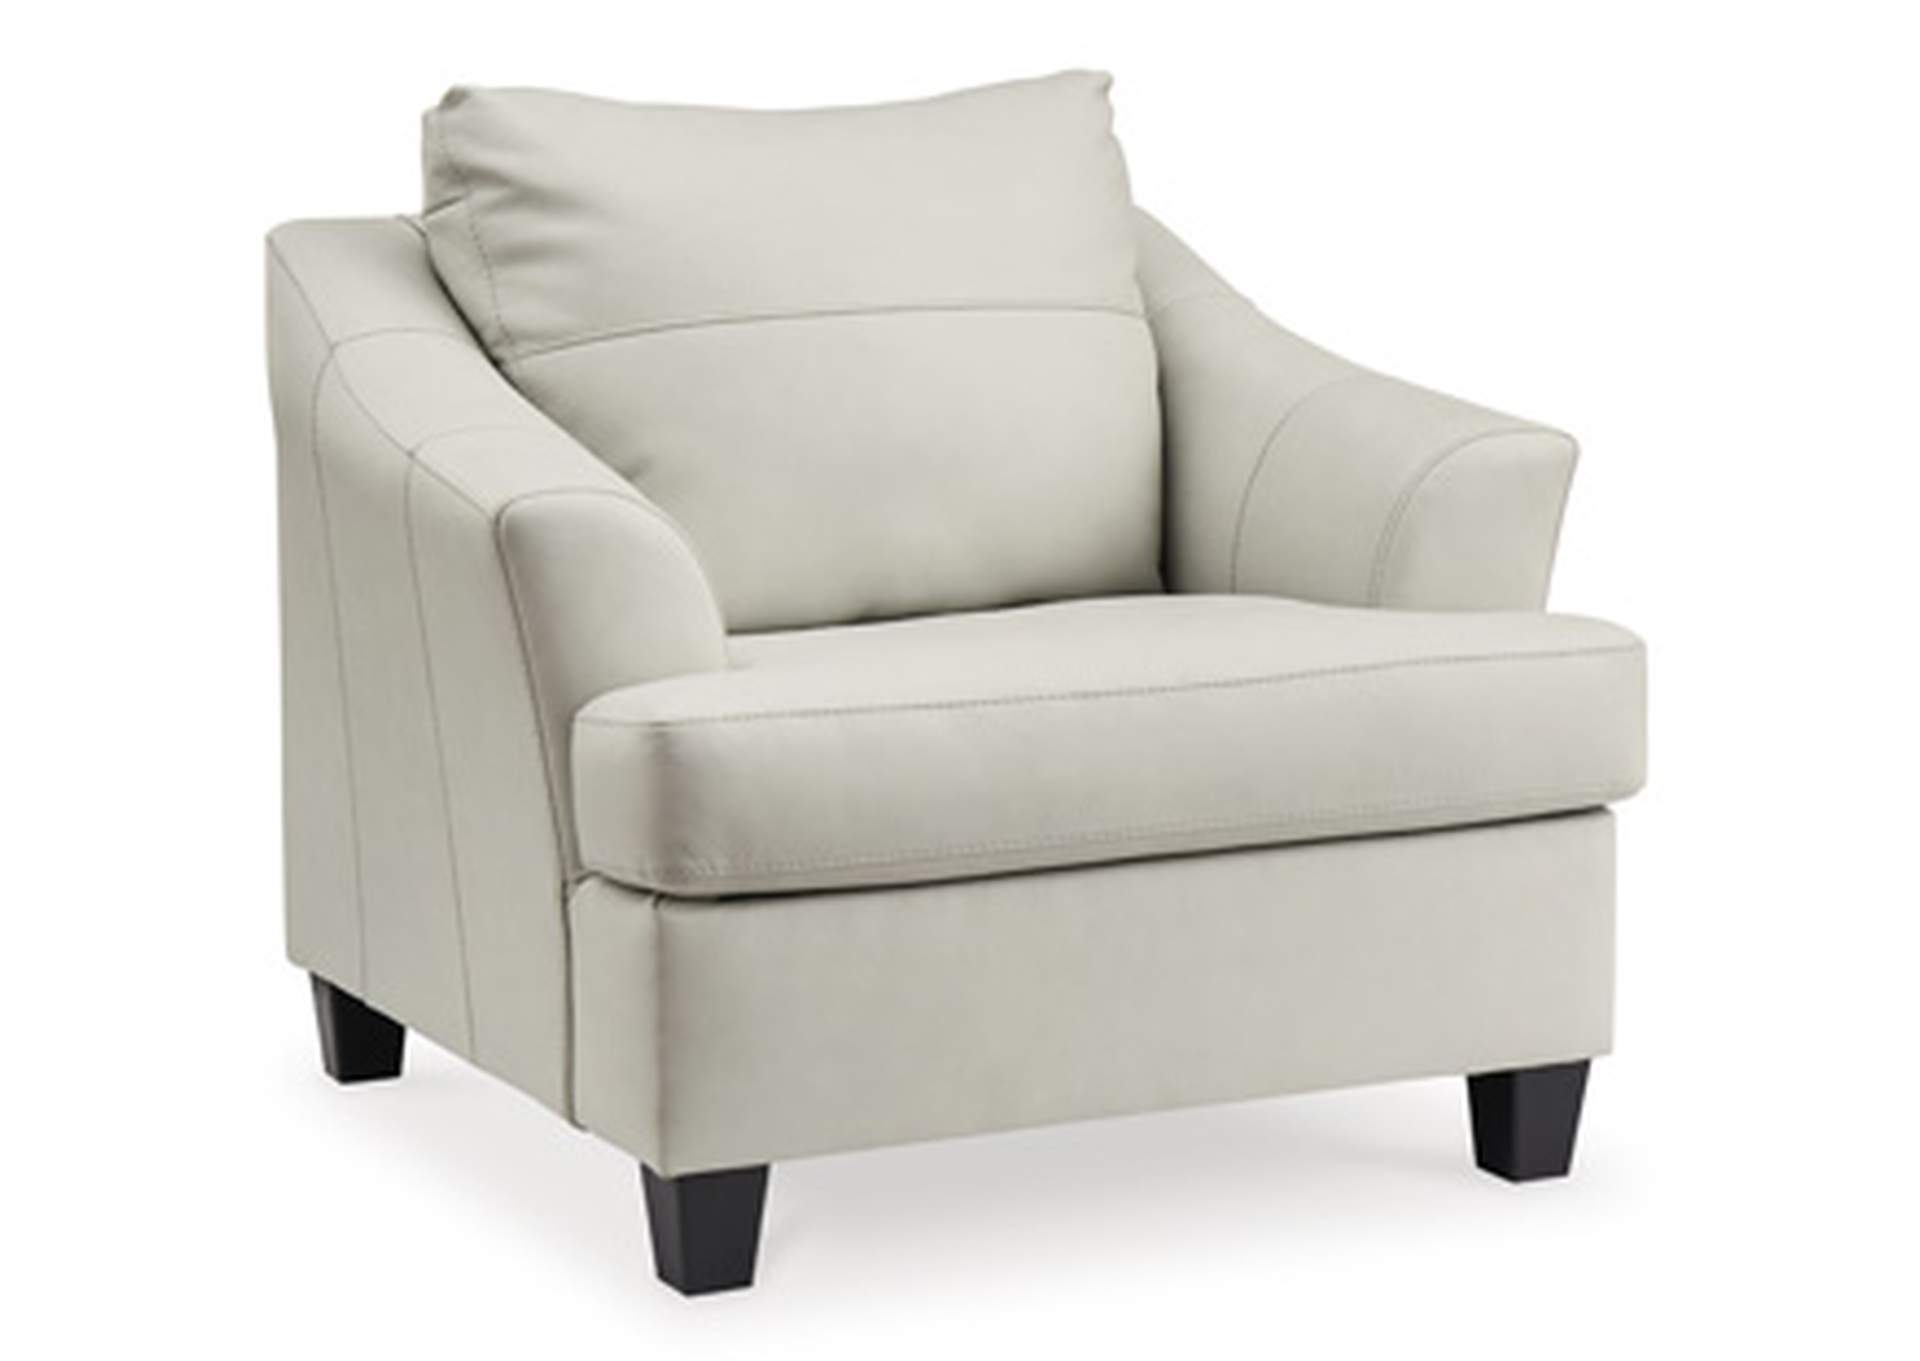 Genoa Oversized Chair,Signature Design By Ashley